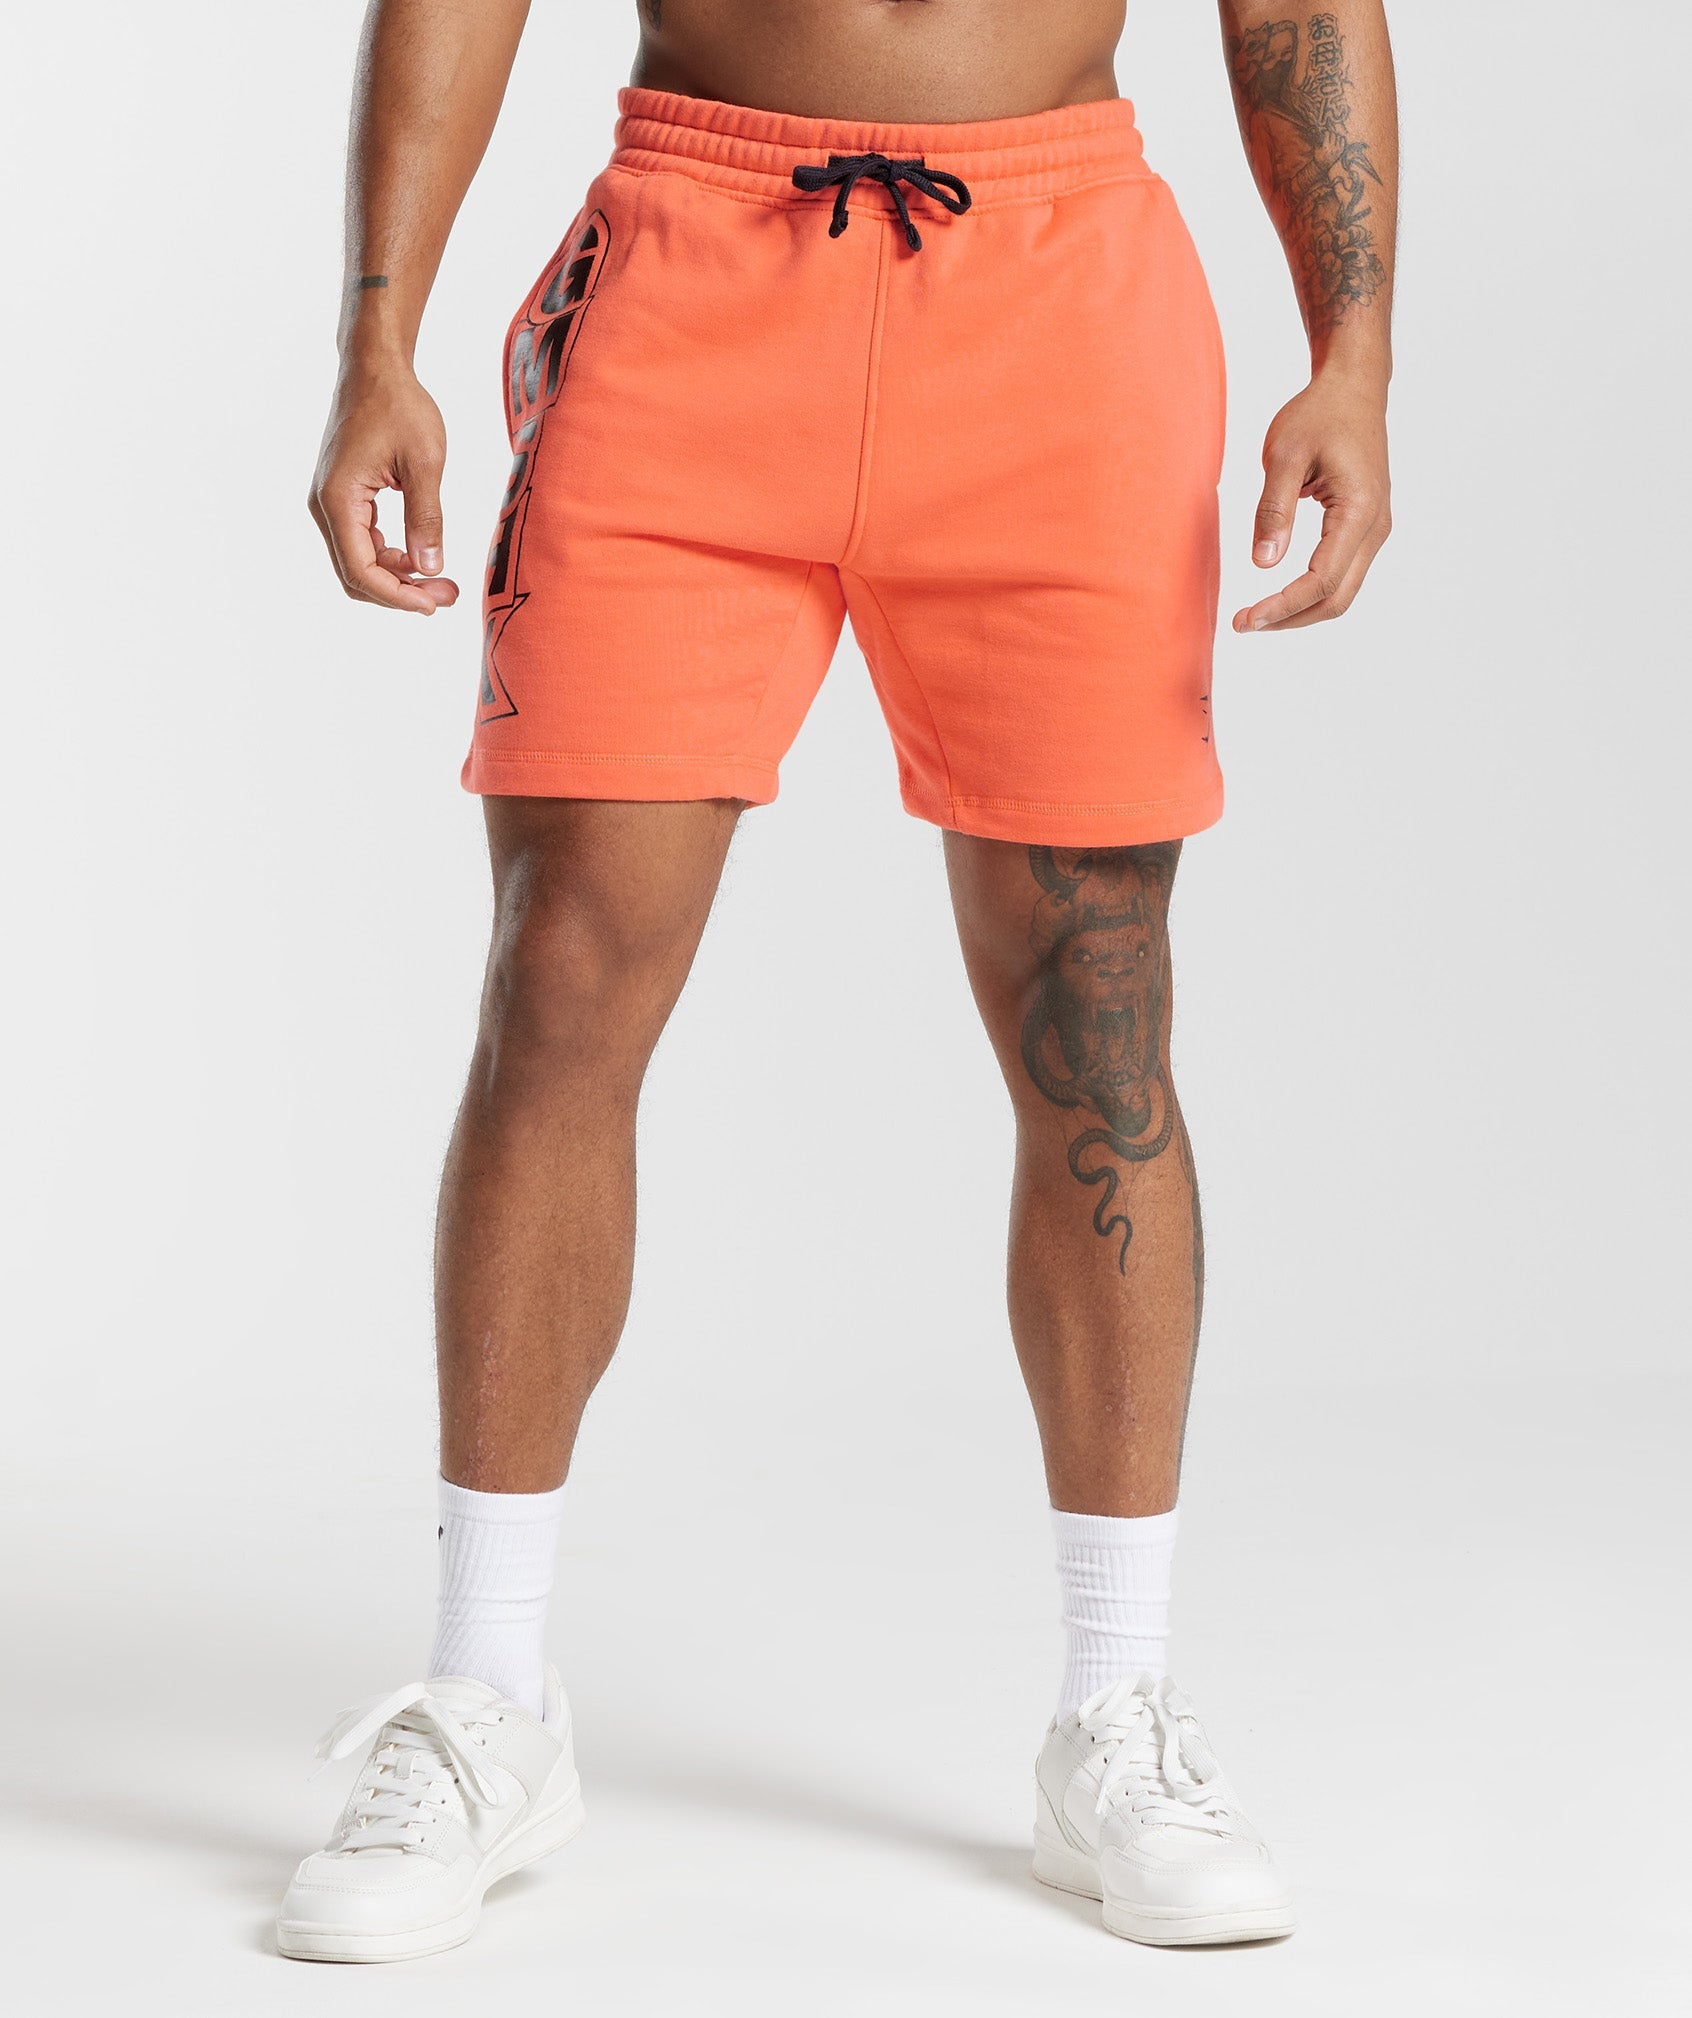 GMSHK Shorts in {{variantColor} is out of stock